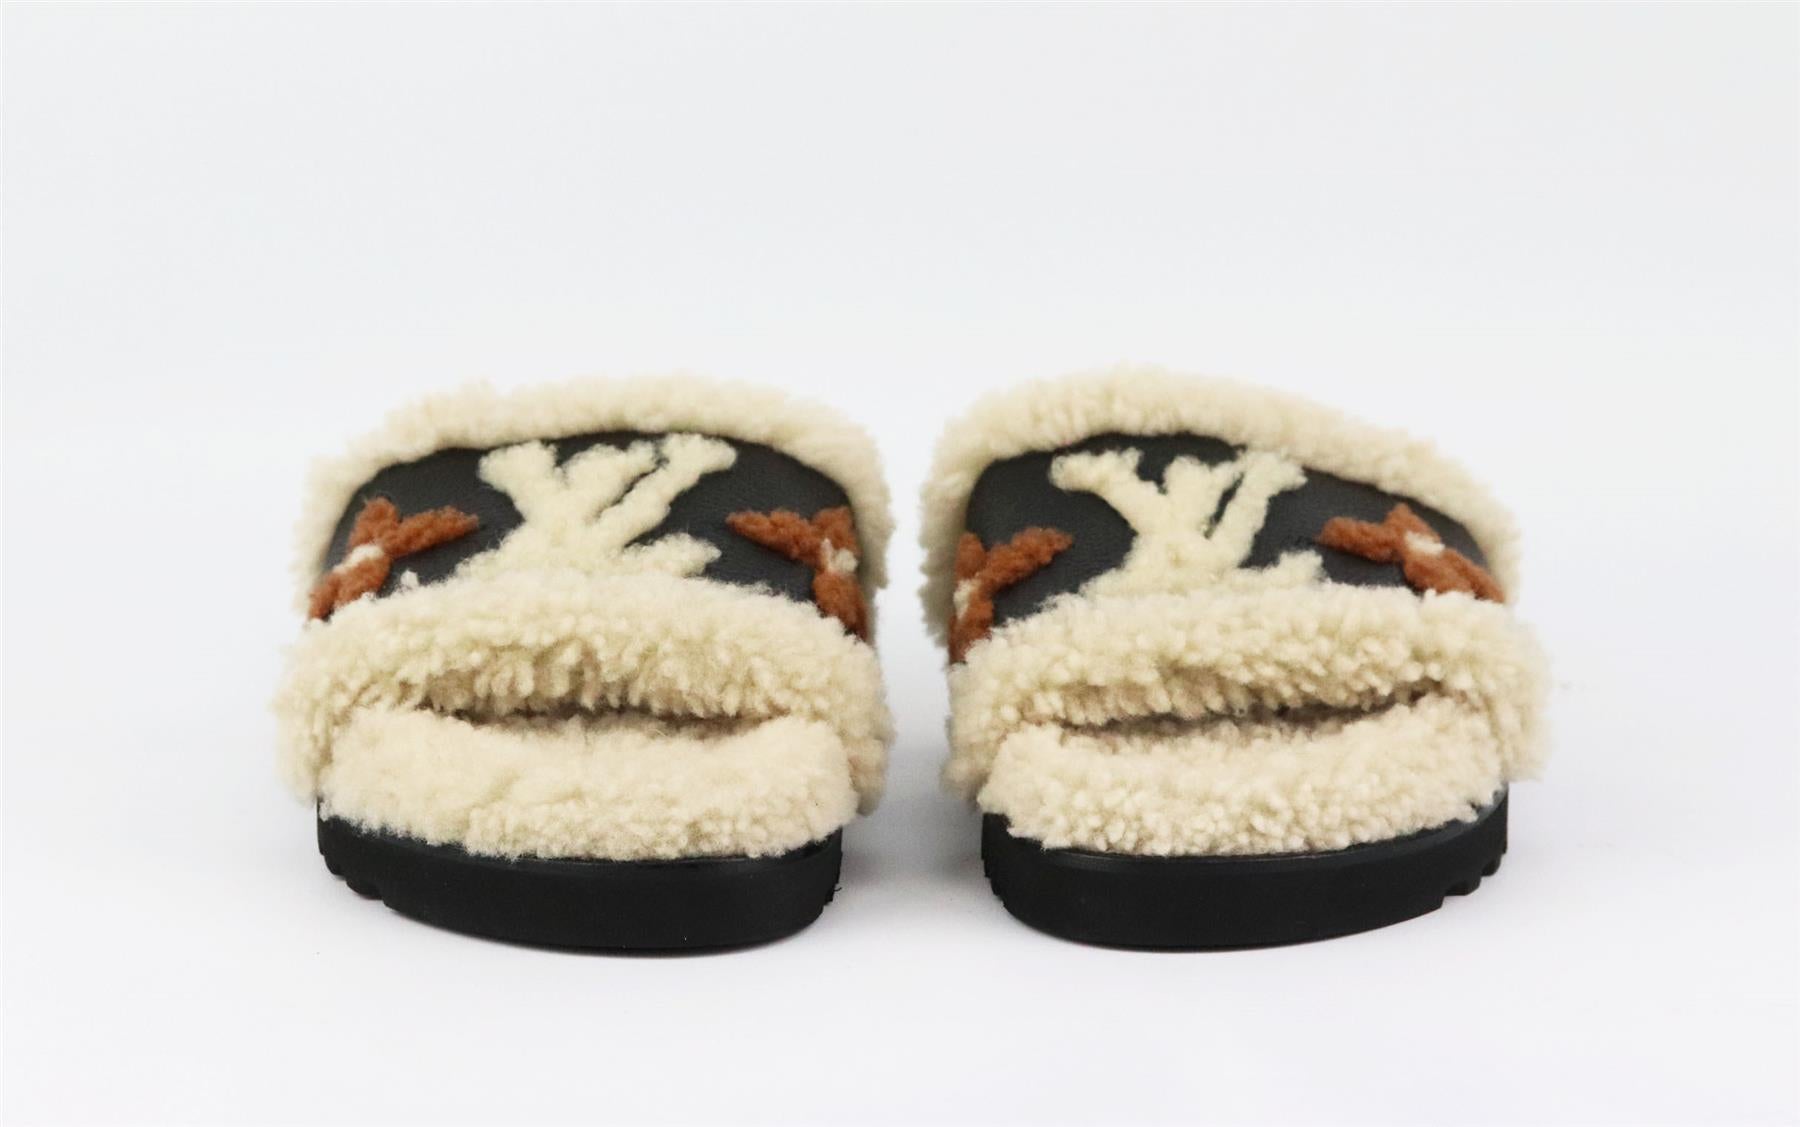 These 'Paseo' slides by Louis Vuitton are made in Italy from plush shearling, they have cushioned heels and wide leather straps detailed with the house's instantly recognizable 'LV' motif in shearling. Sole measures approximately 50 mm/ 2 inches.